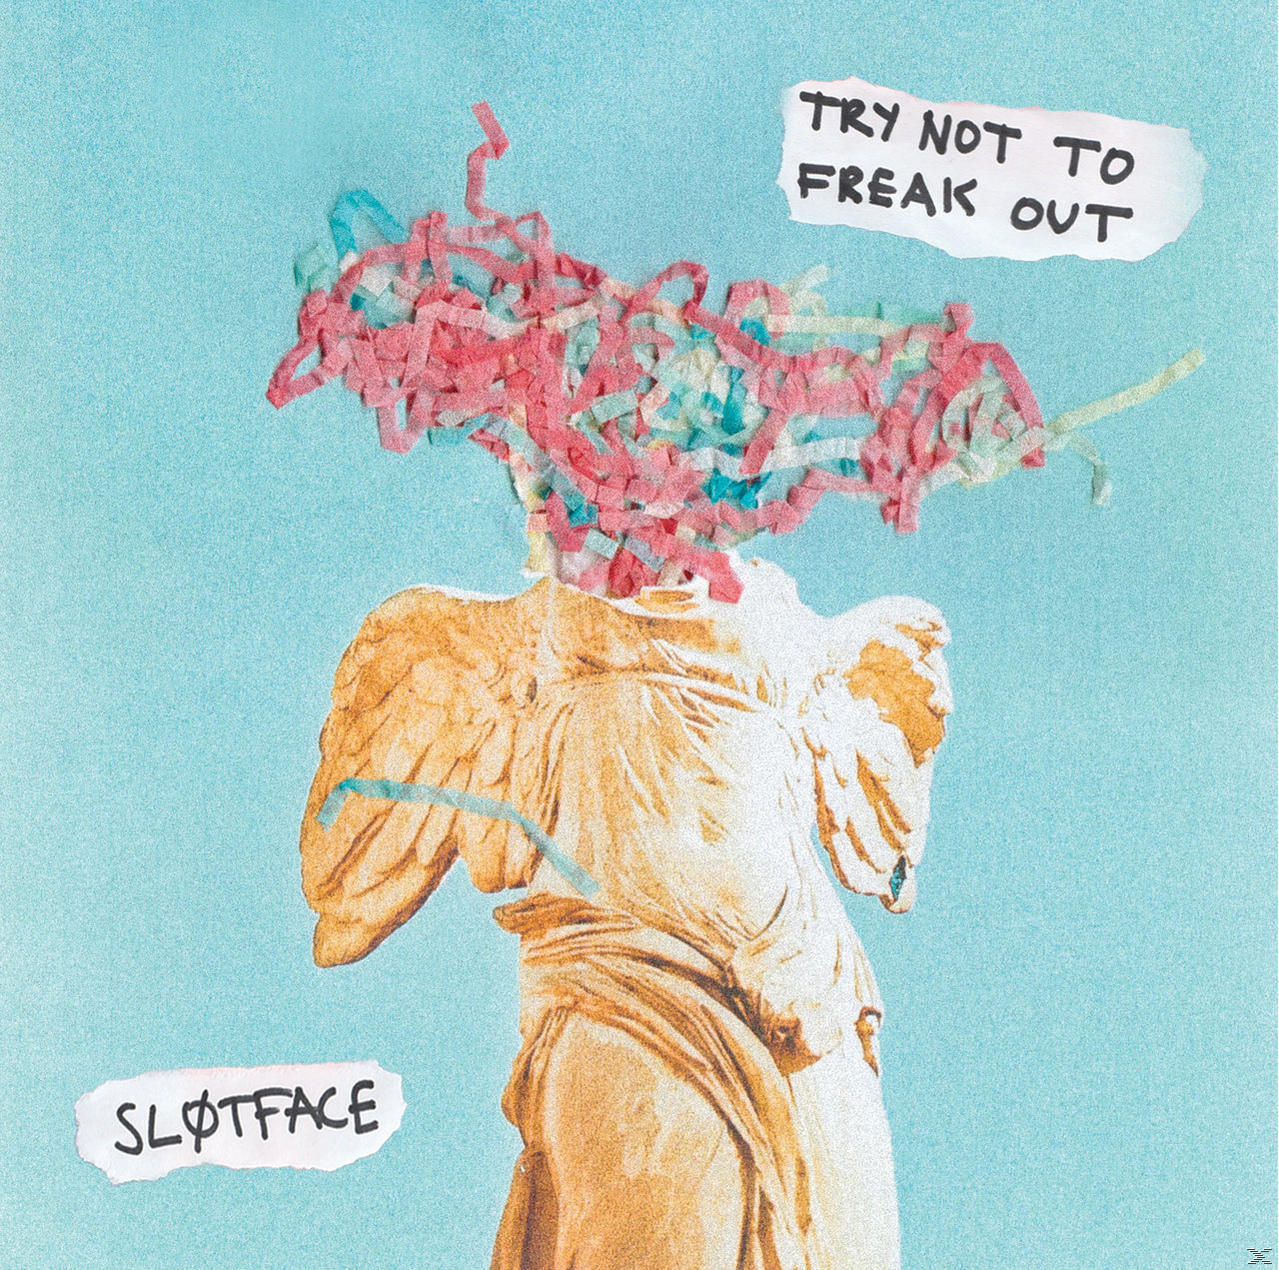 OUT TRY NOT (CD) - Slotface FREAK TO -